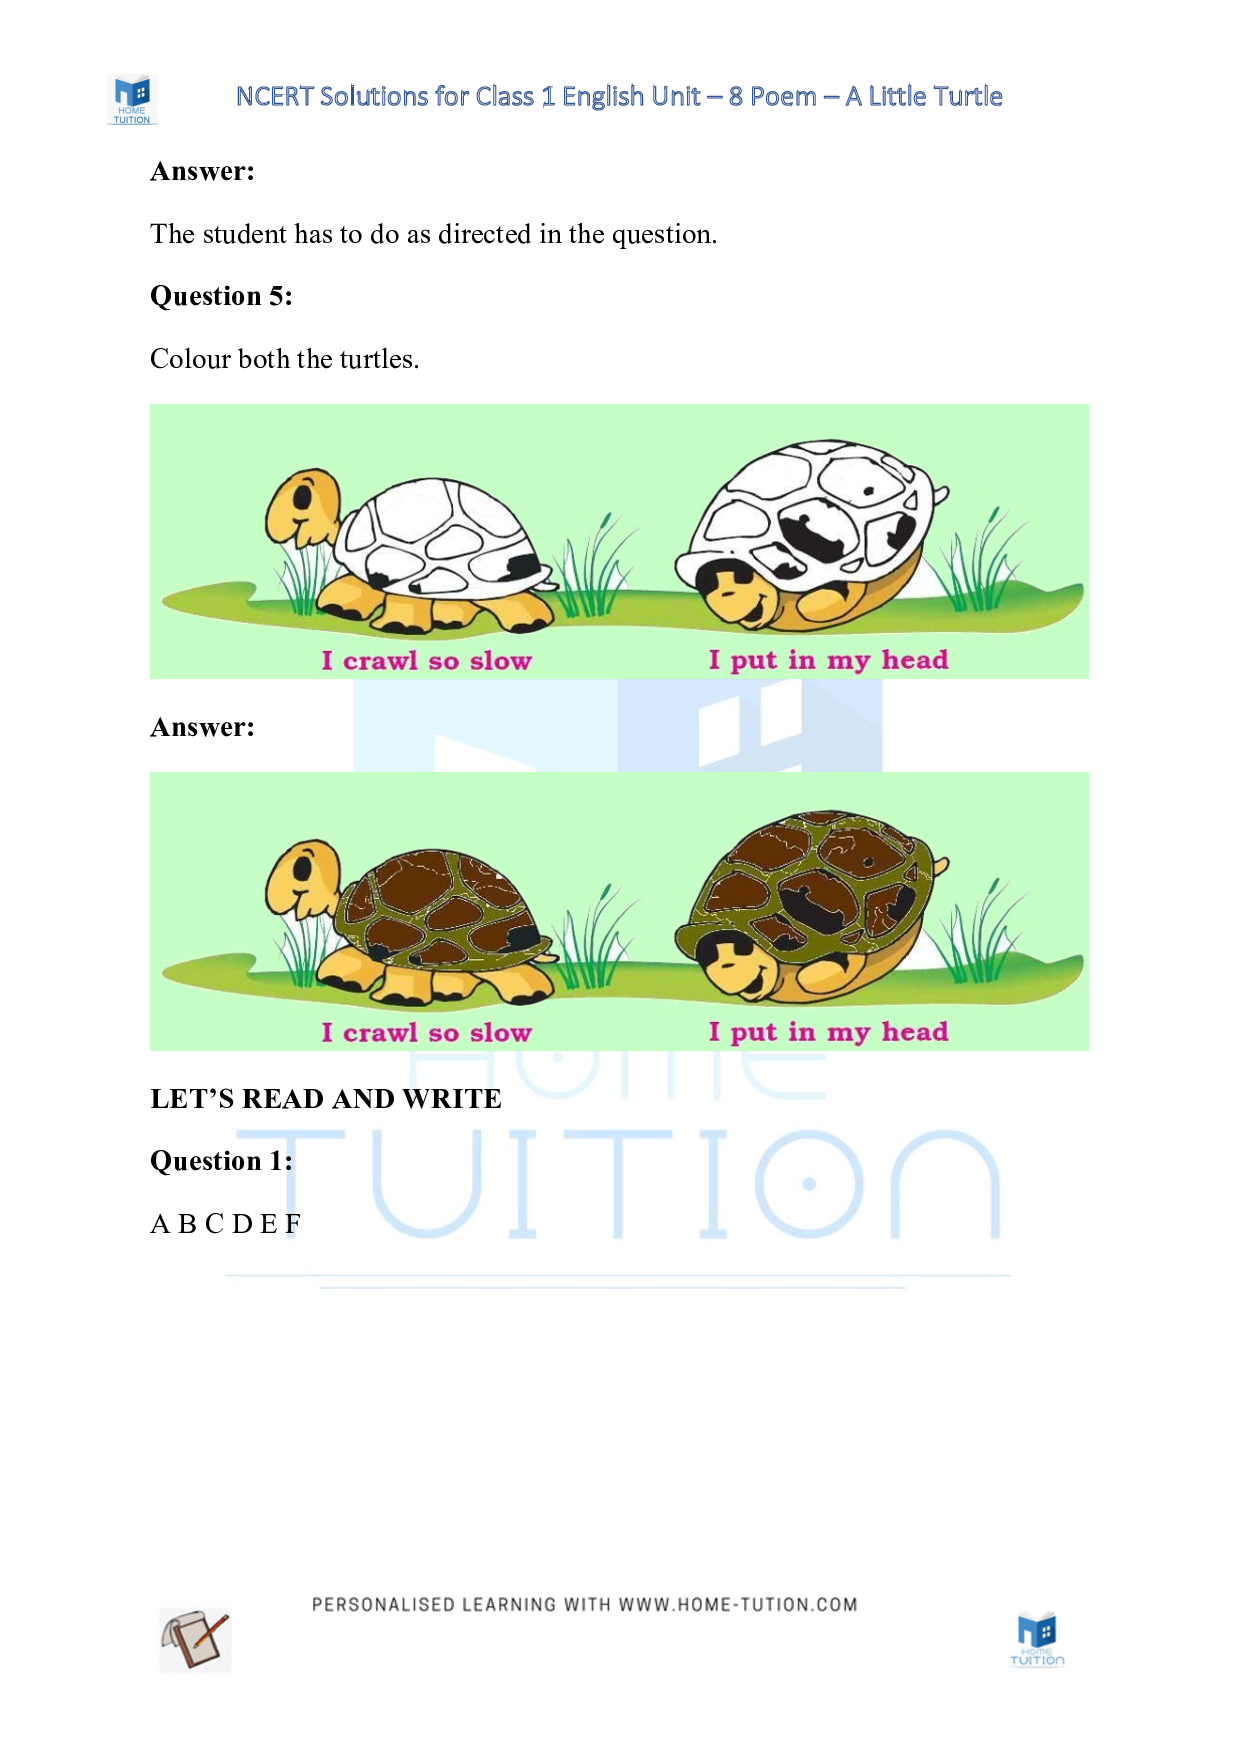 NCERT Solutions for Class 1 English Unit 8 Poem - A Little Turtle